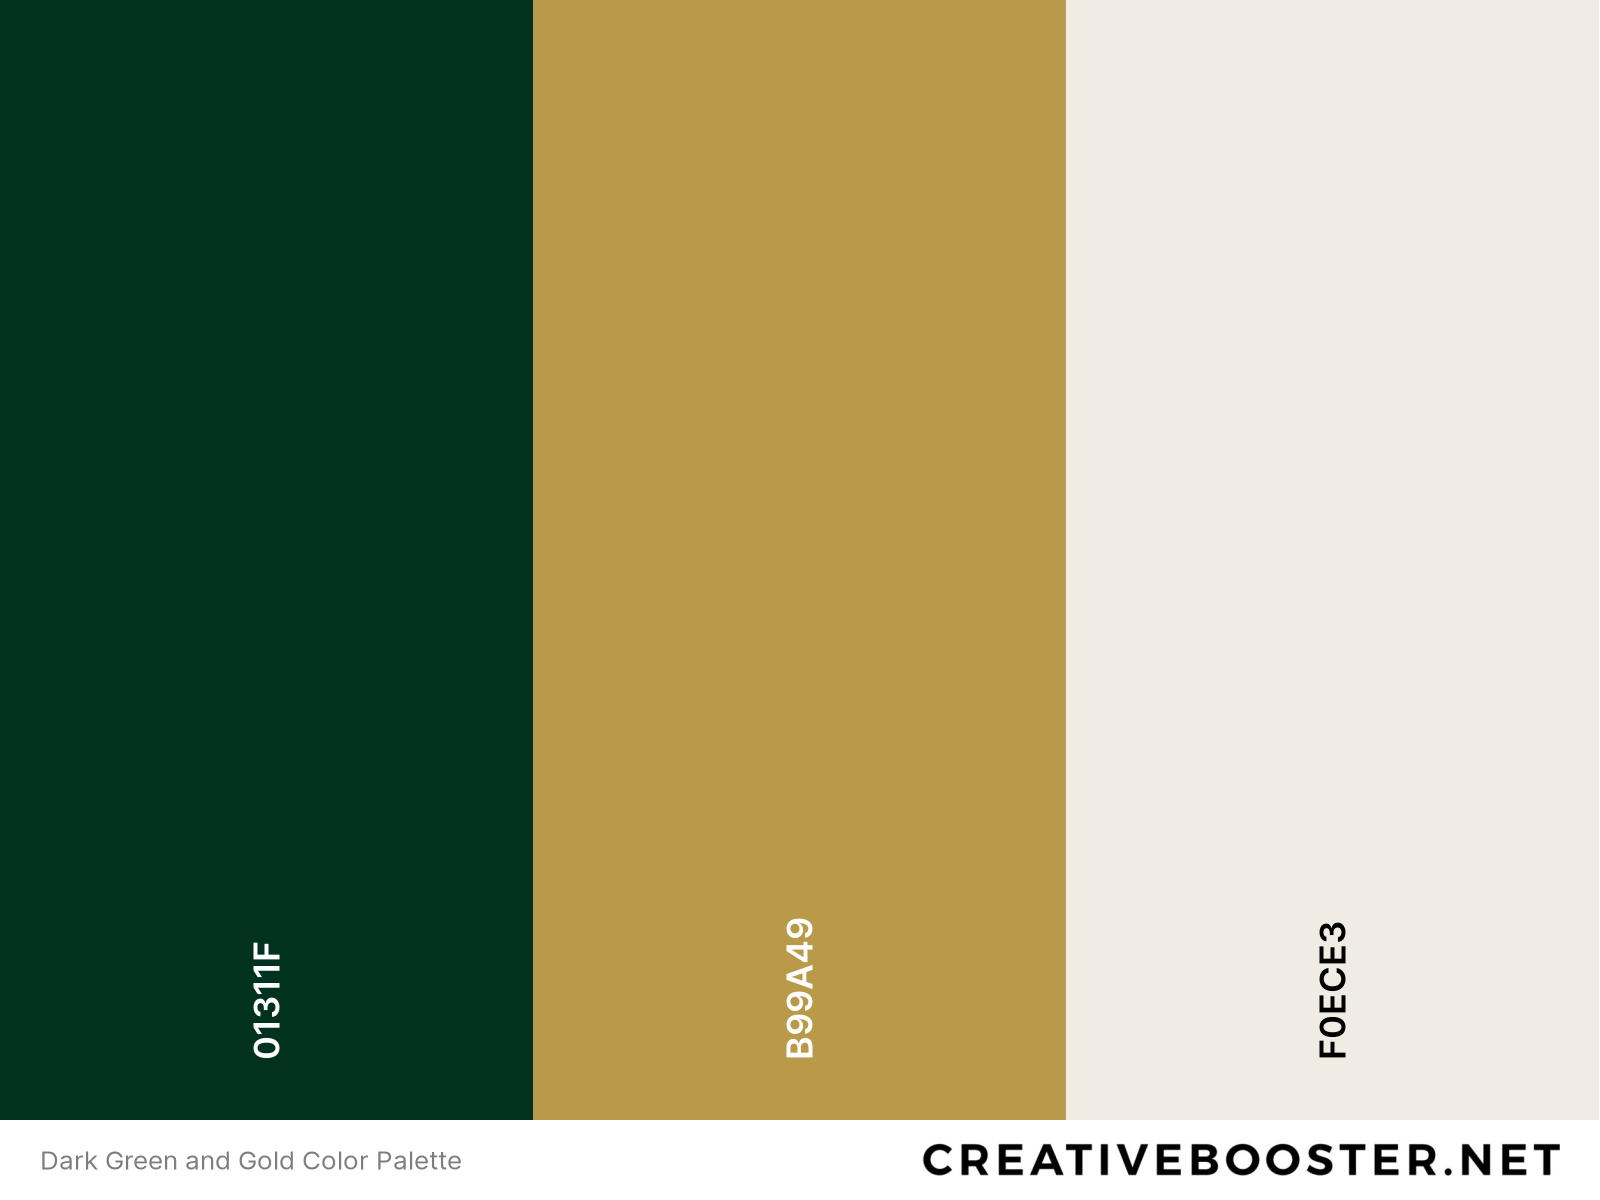 Dark Green and Gold Color Palette